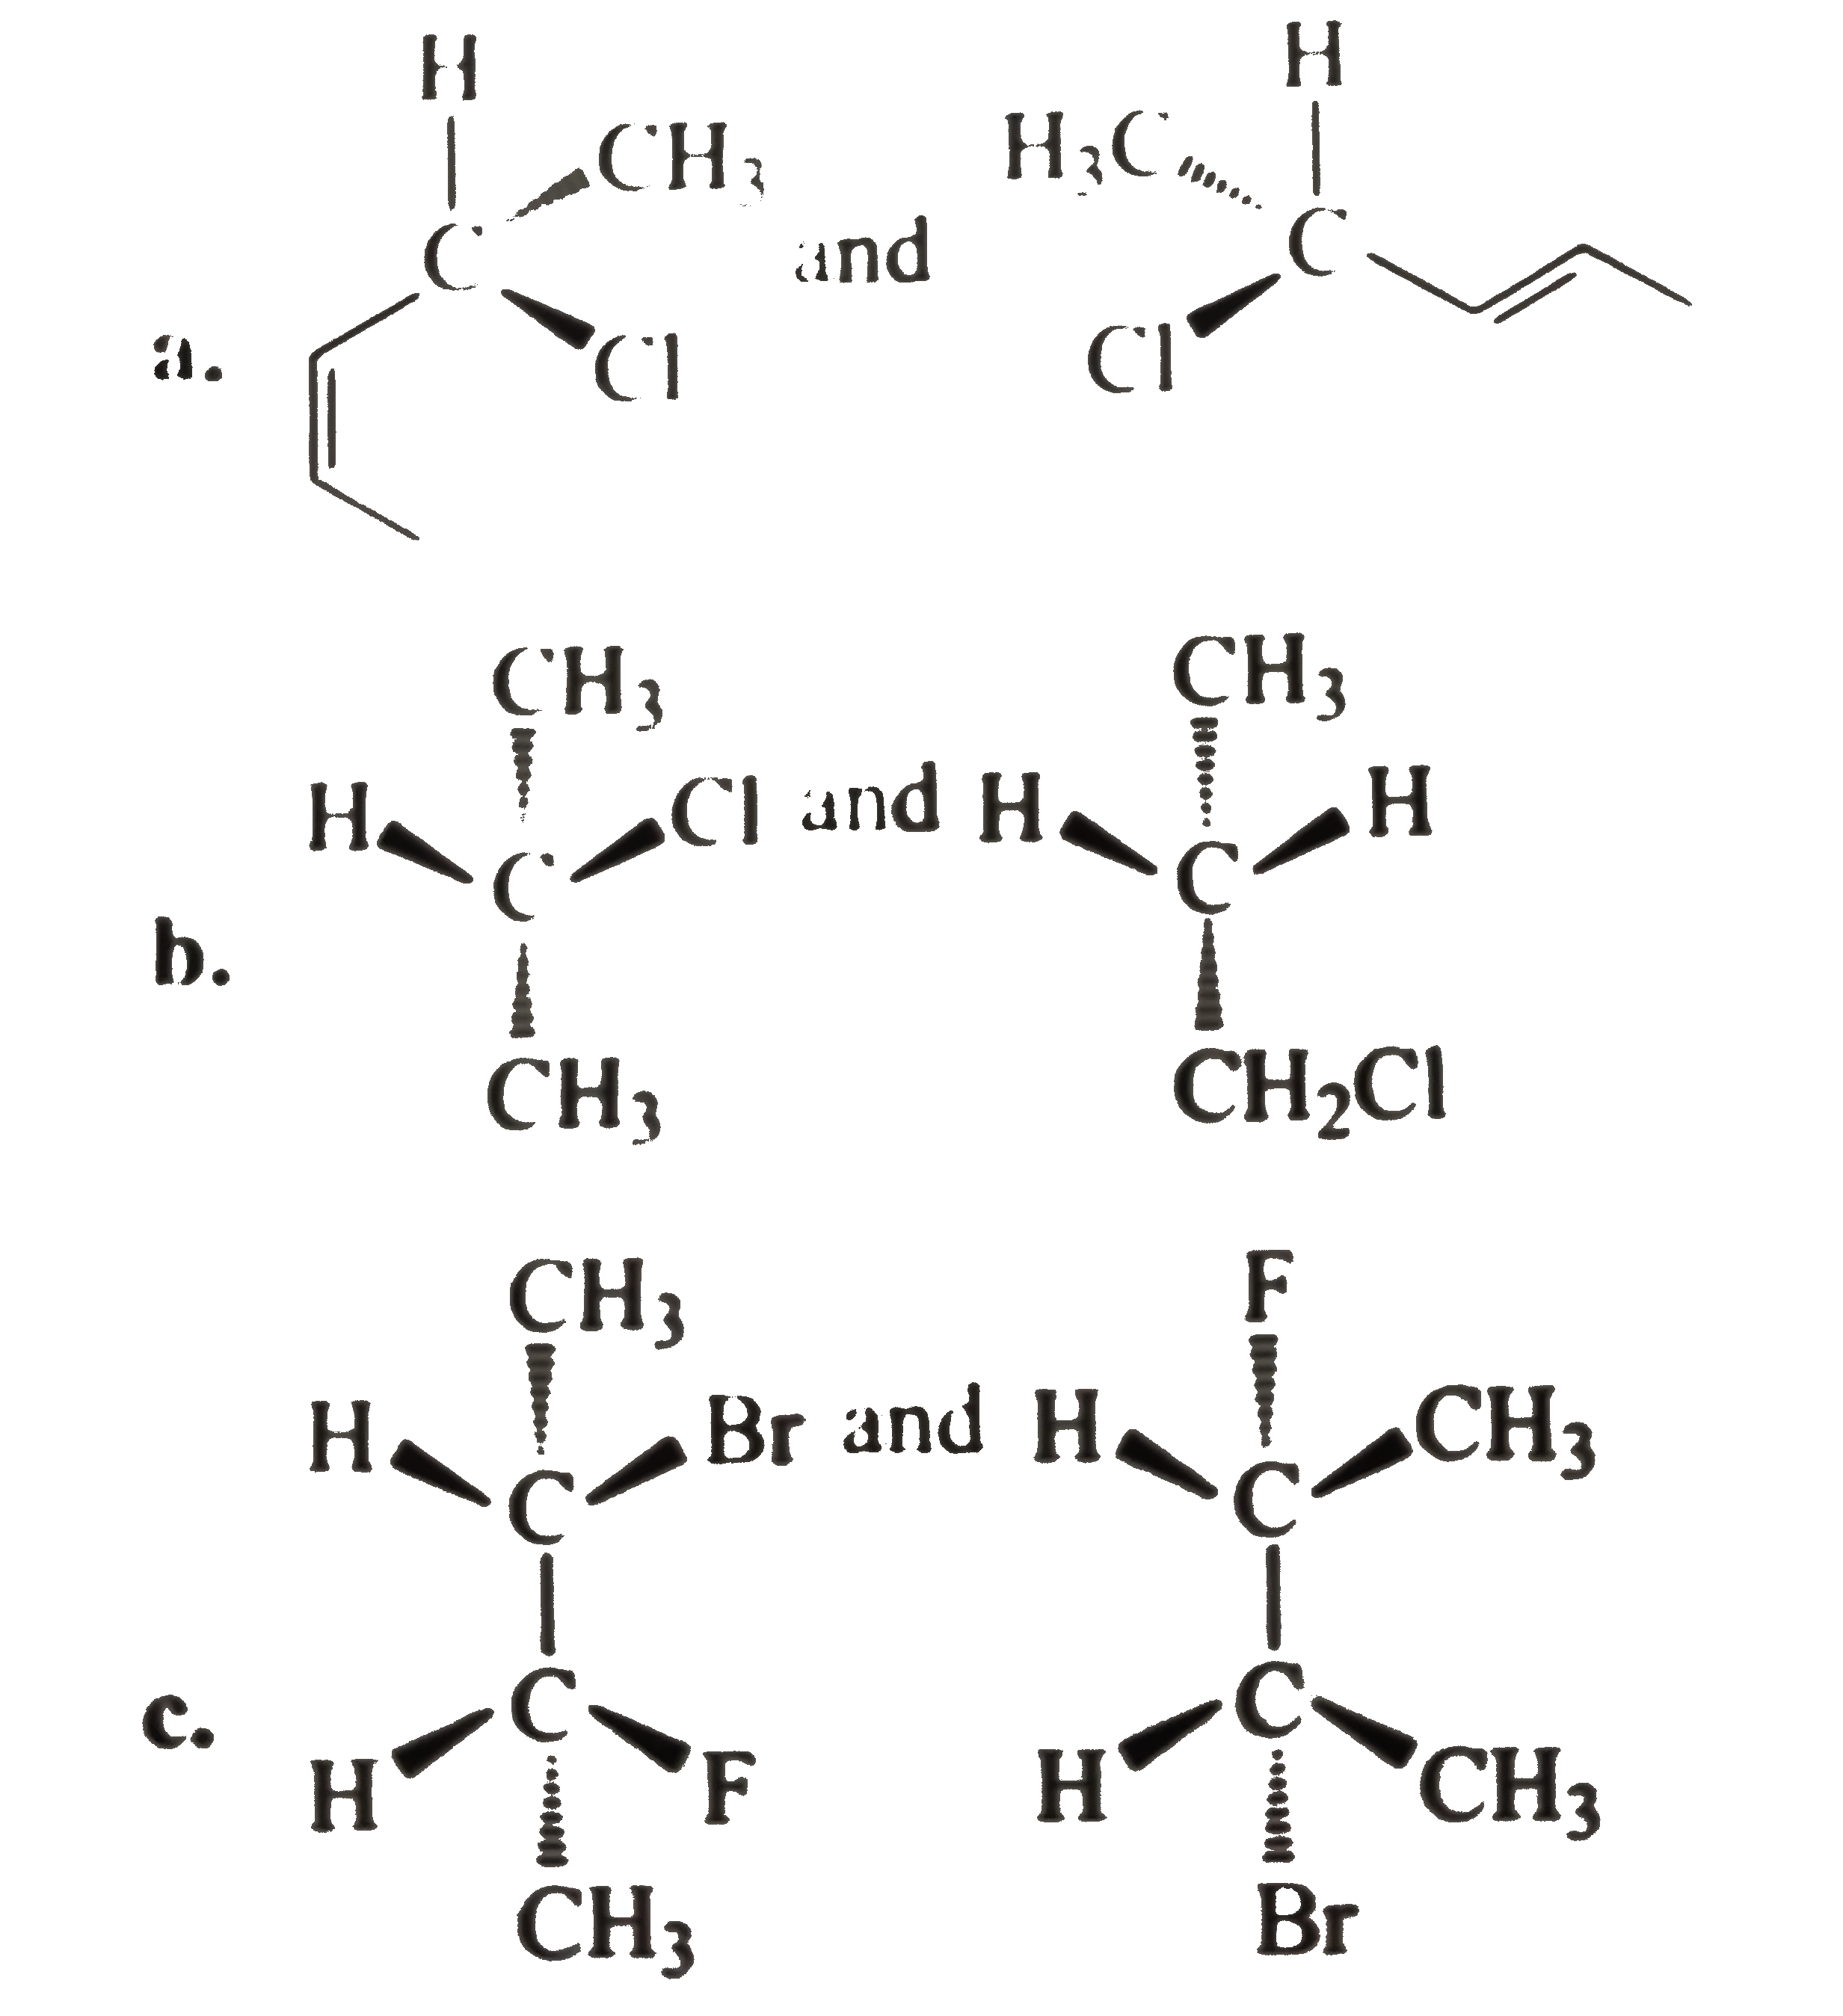 Consider the following pairs of structrue. Identify the relationship between them by describing them as presenting enantiomers, diastereomers, consitutional isomers, or two molecule of the same compound.